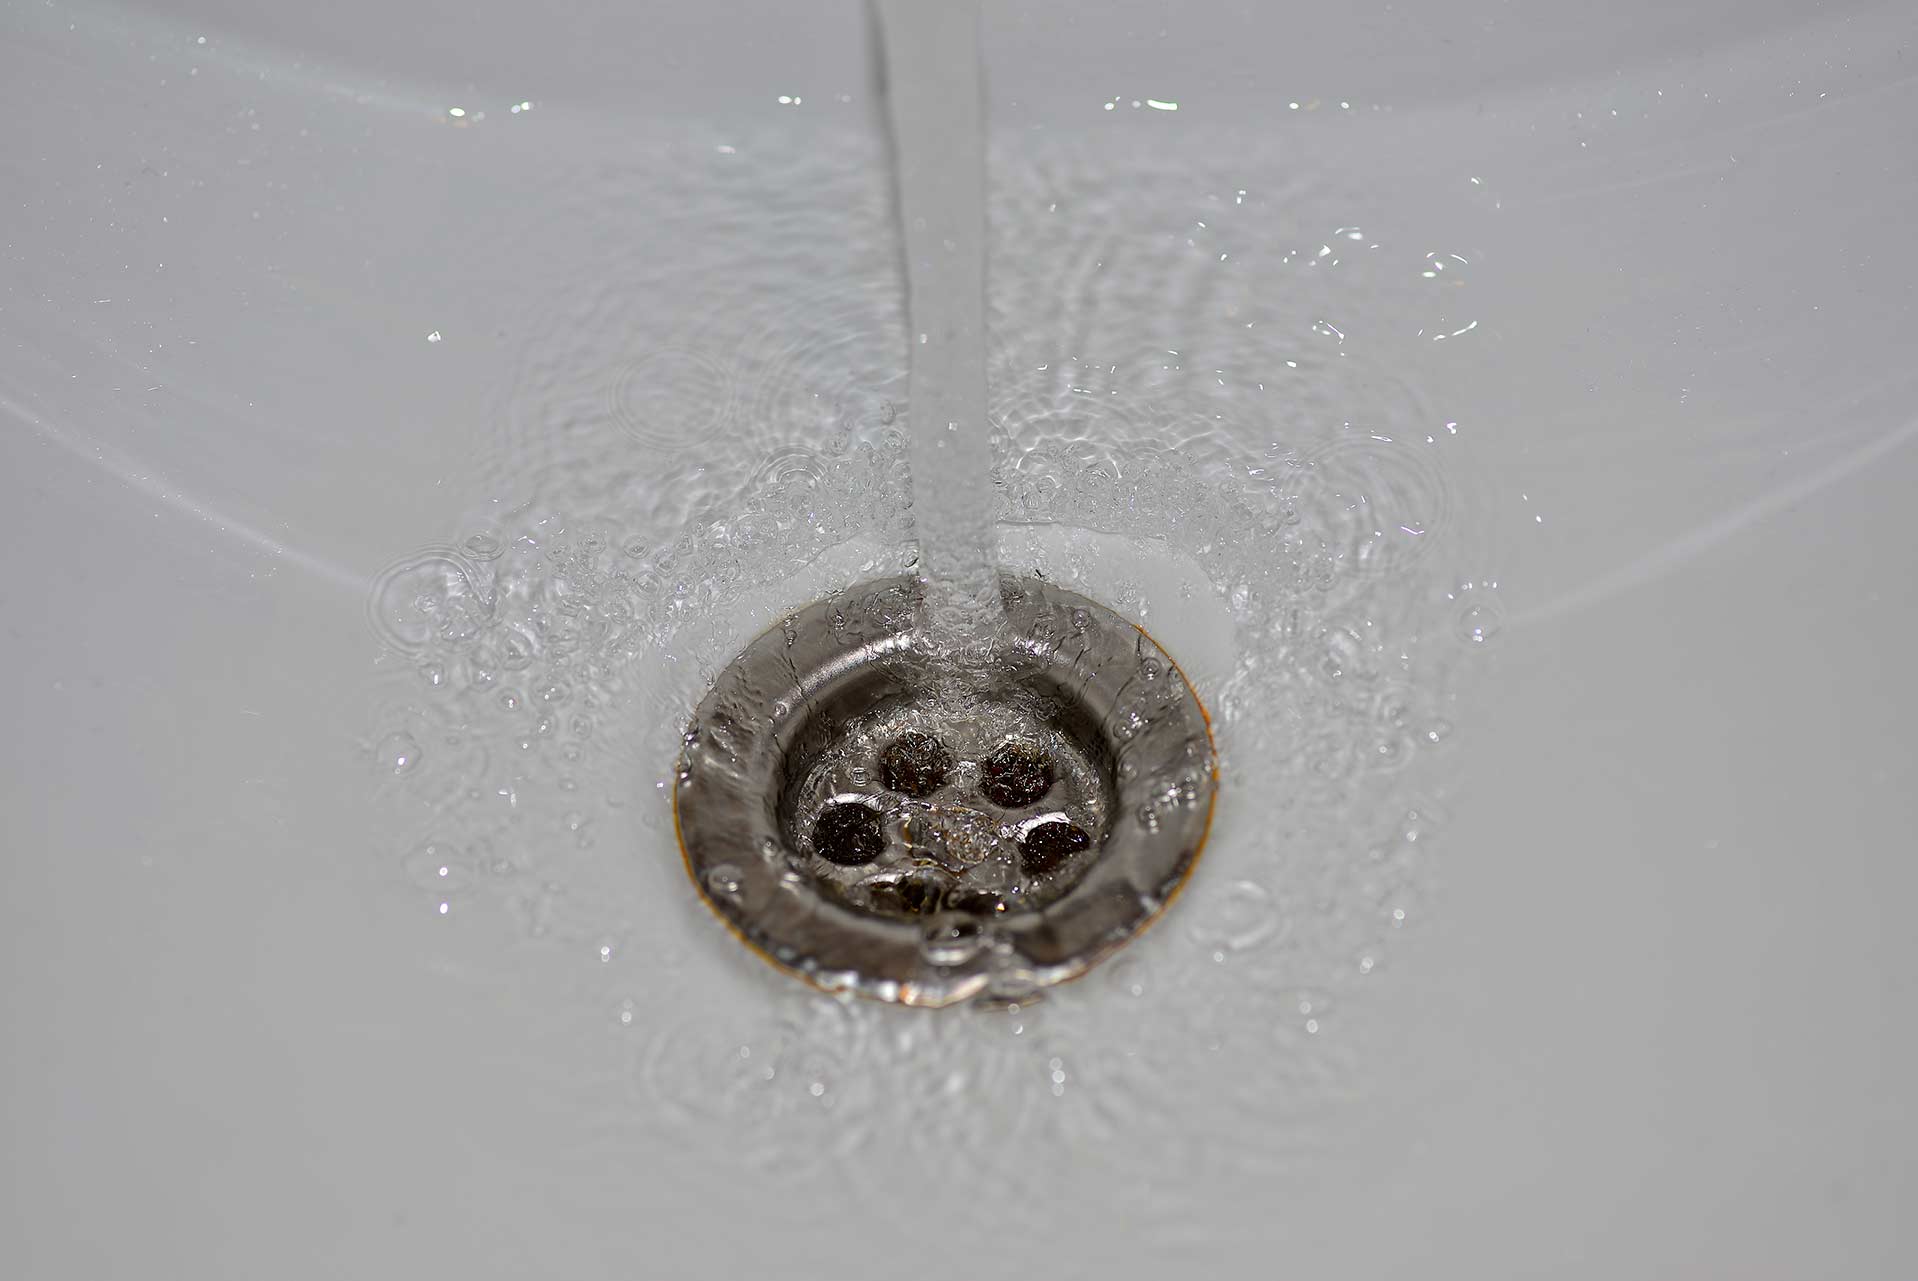 A2B Drains provides services to unblock blocked sinks and drains for properties in Coulsdon.